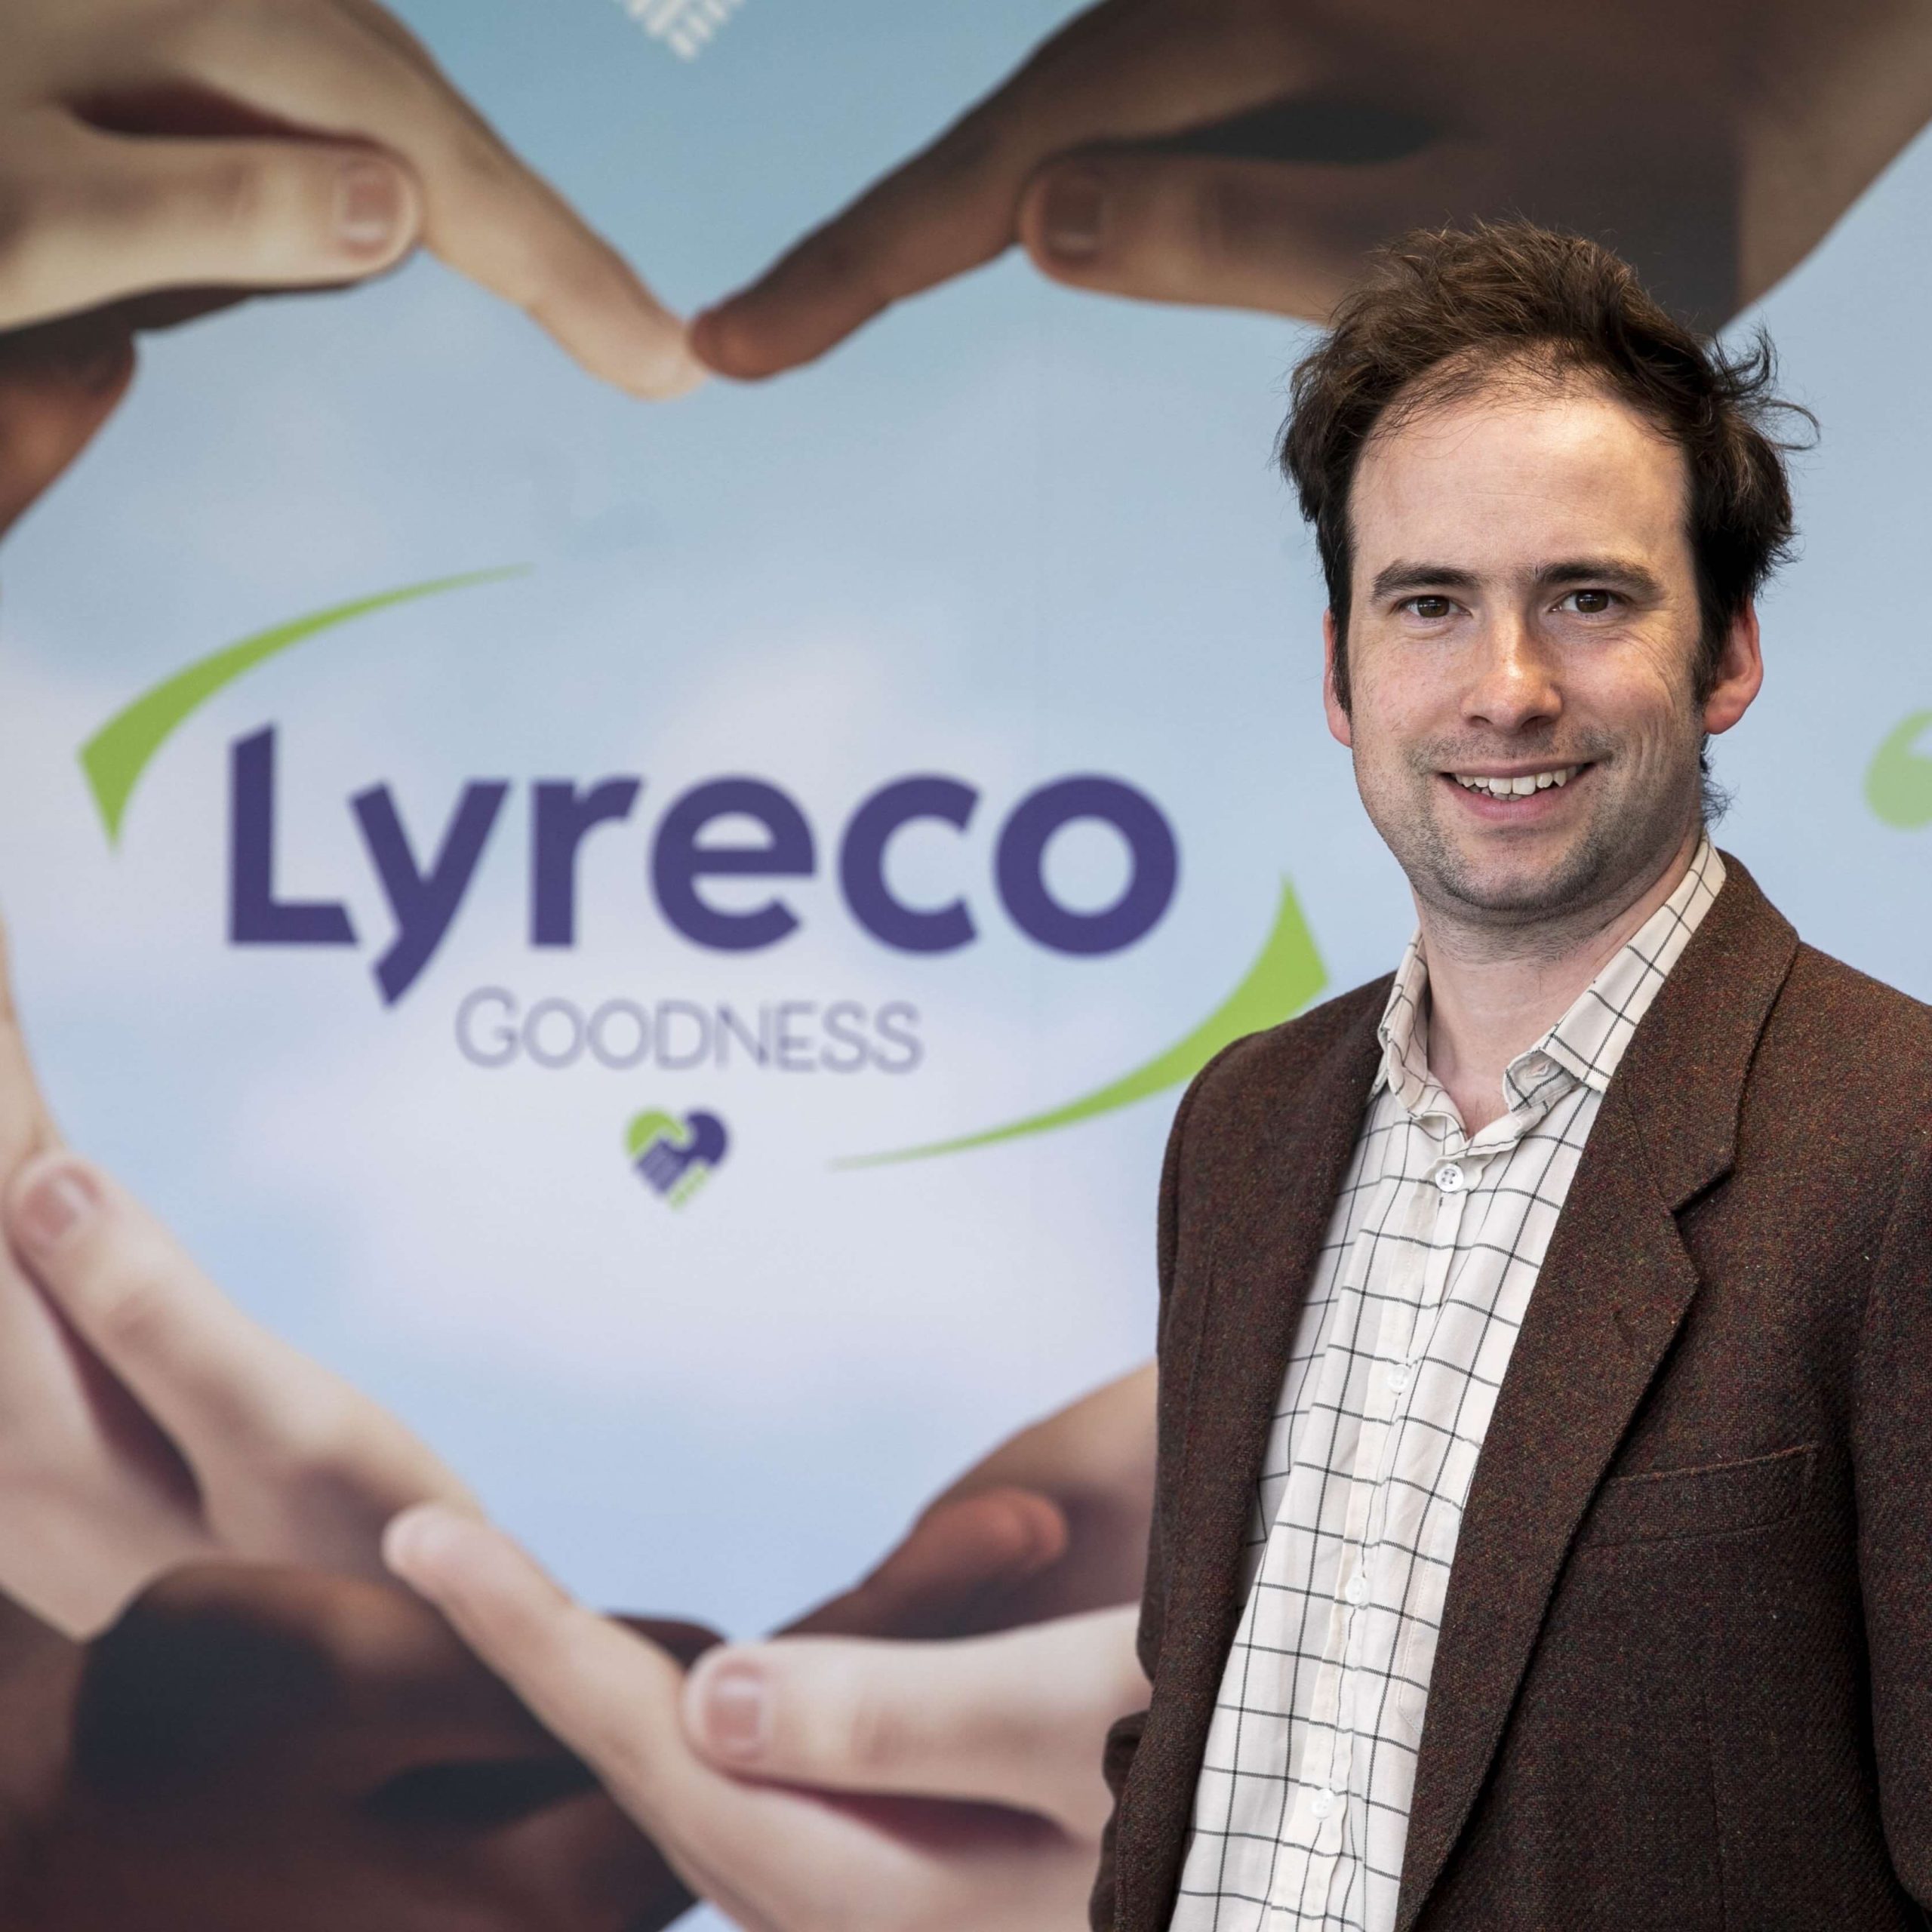 Lyreco Goodness supports Supplier Sustainability